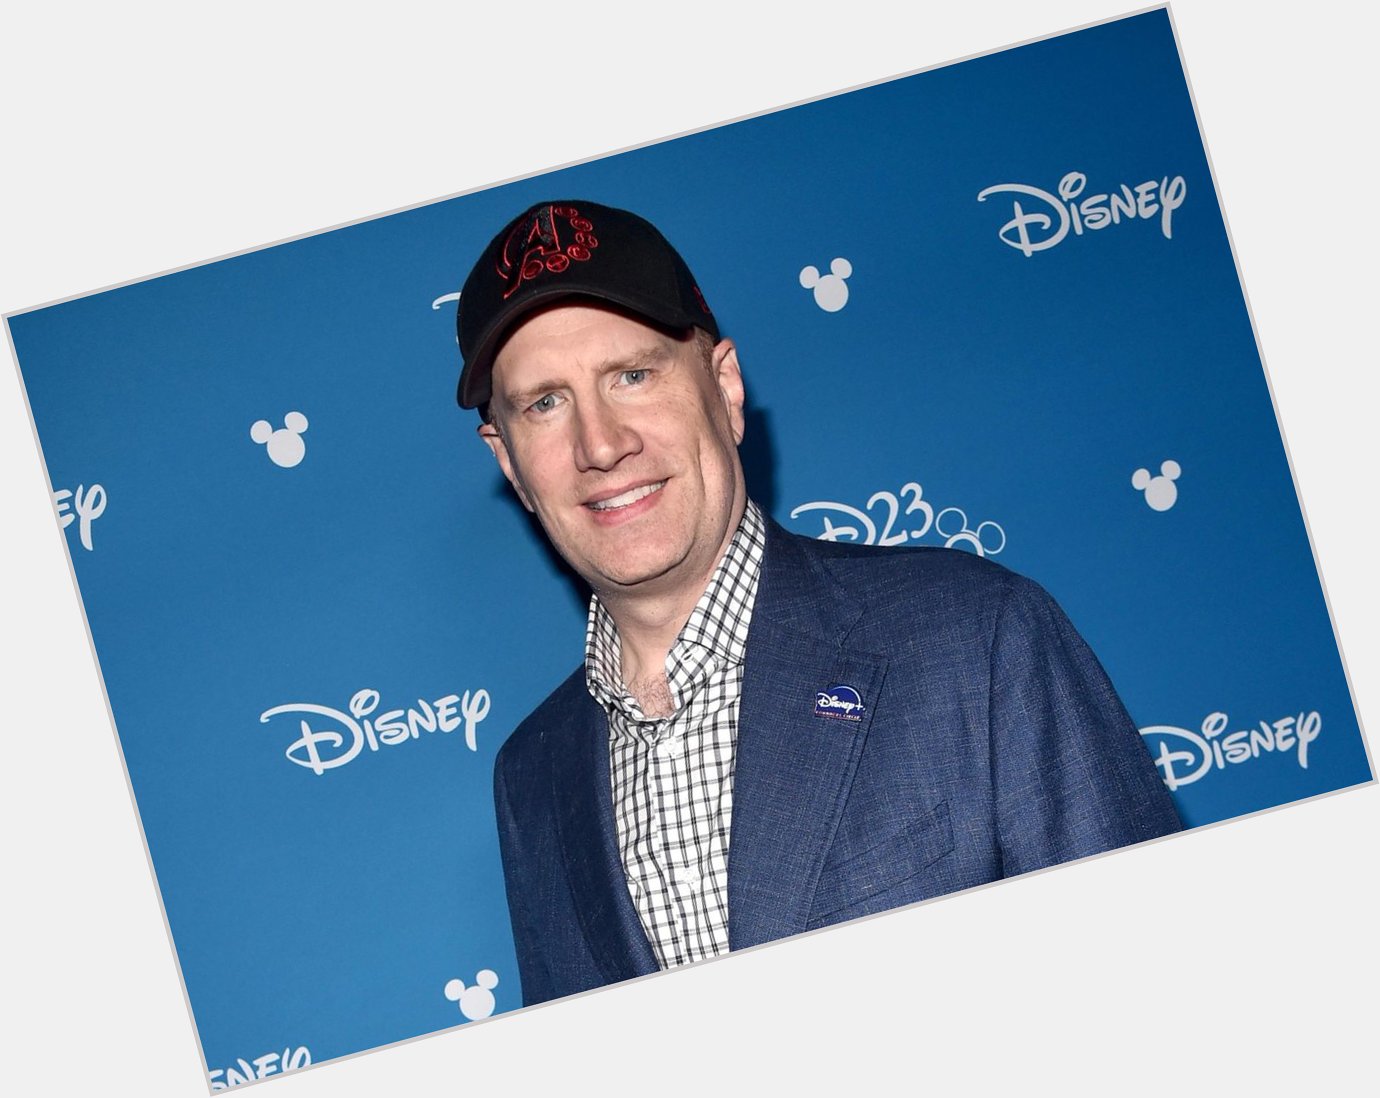 Well, I m gonna wish Kevin Feige a happy birthday, since no one else will. Happy birthday Kevin! 